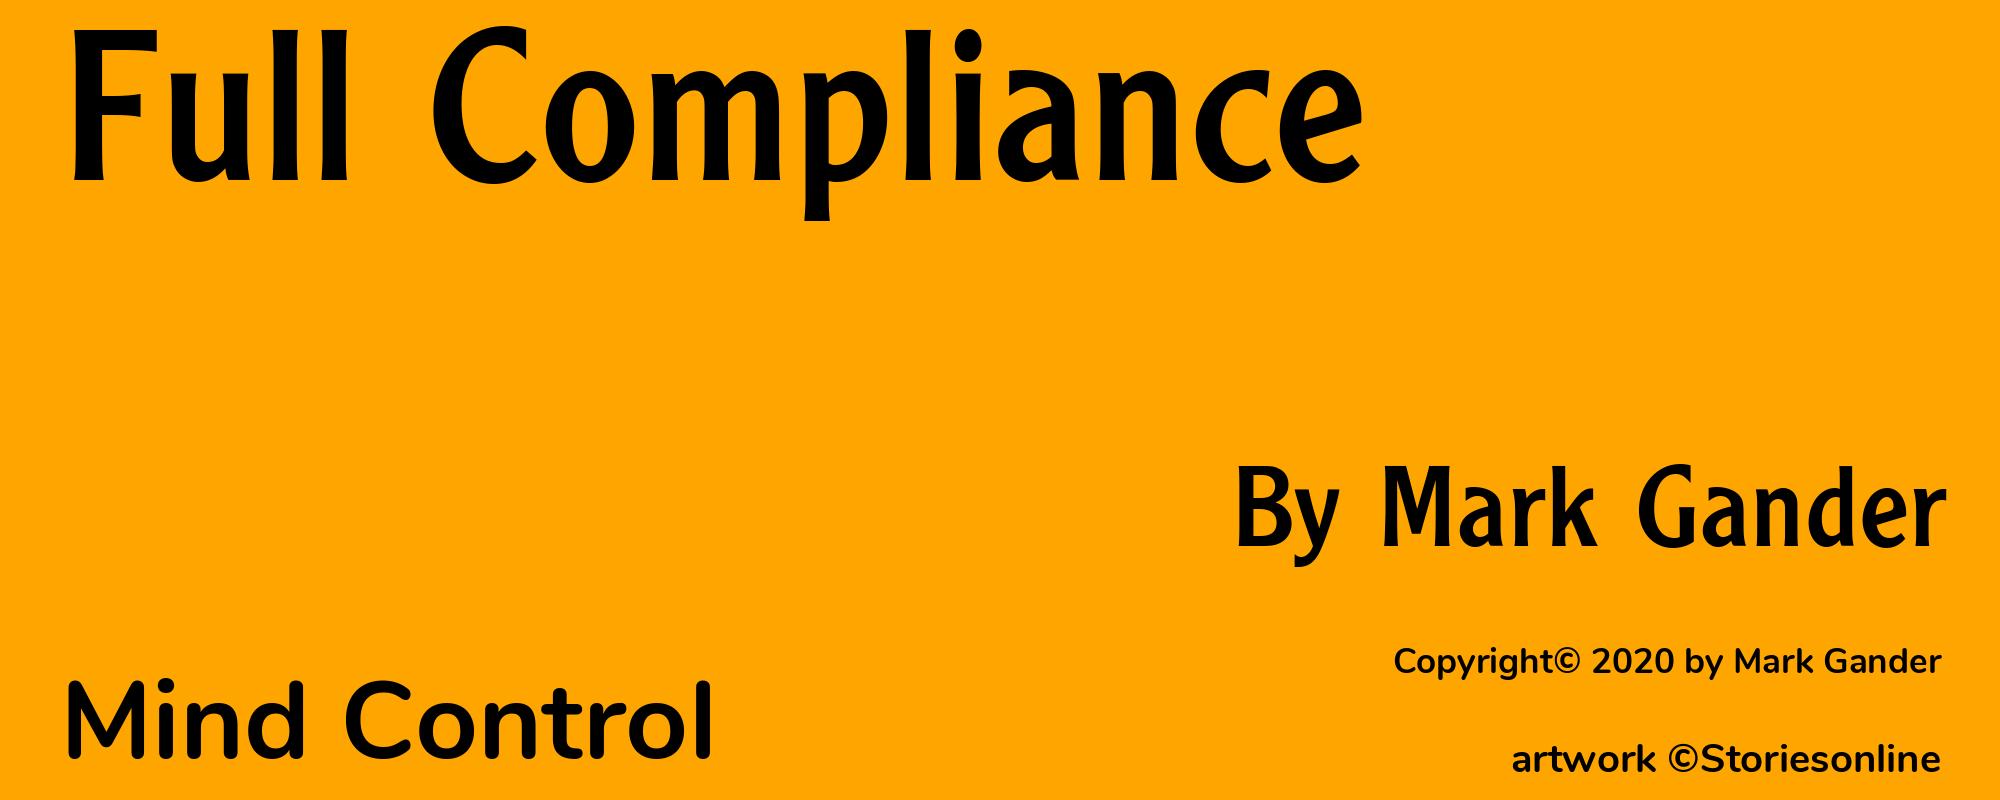 Full Compliance - Cover